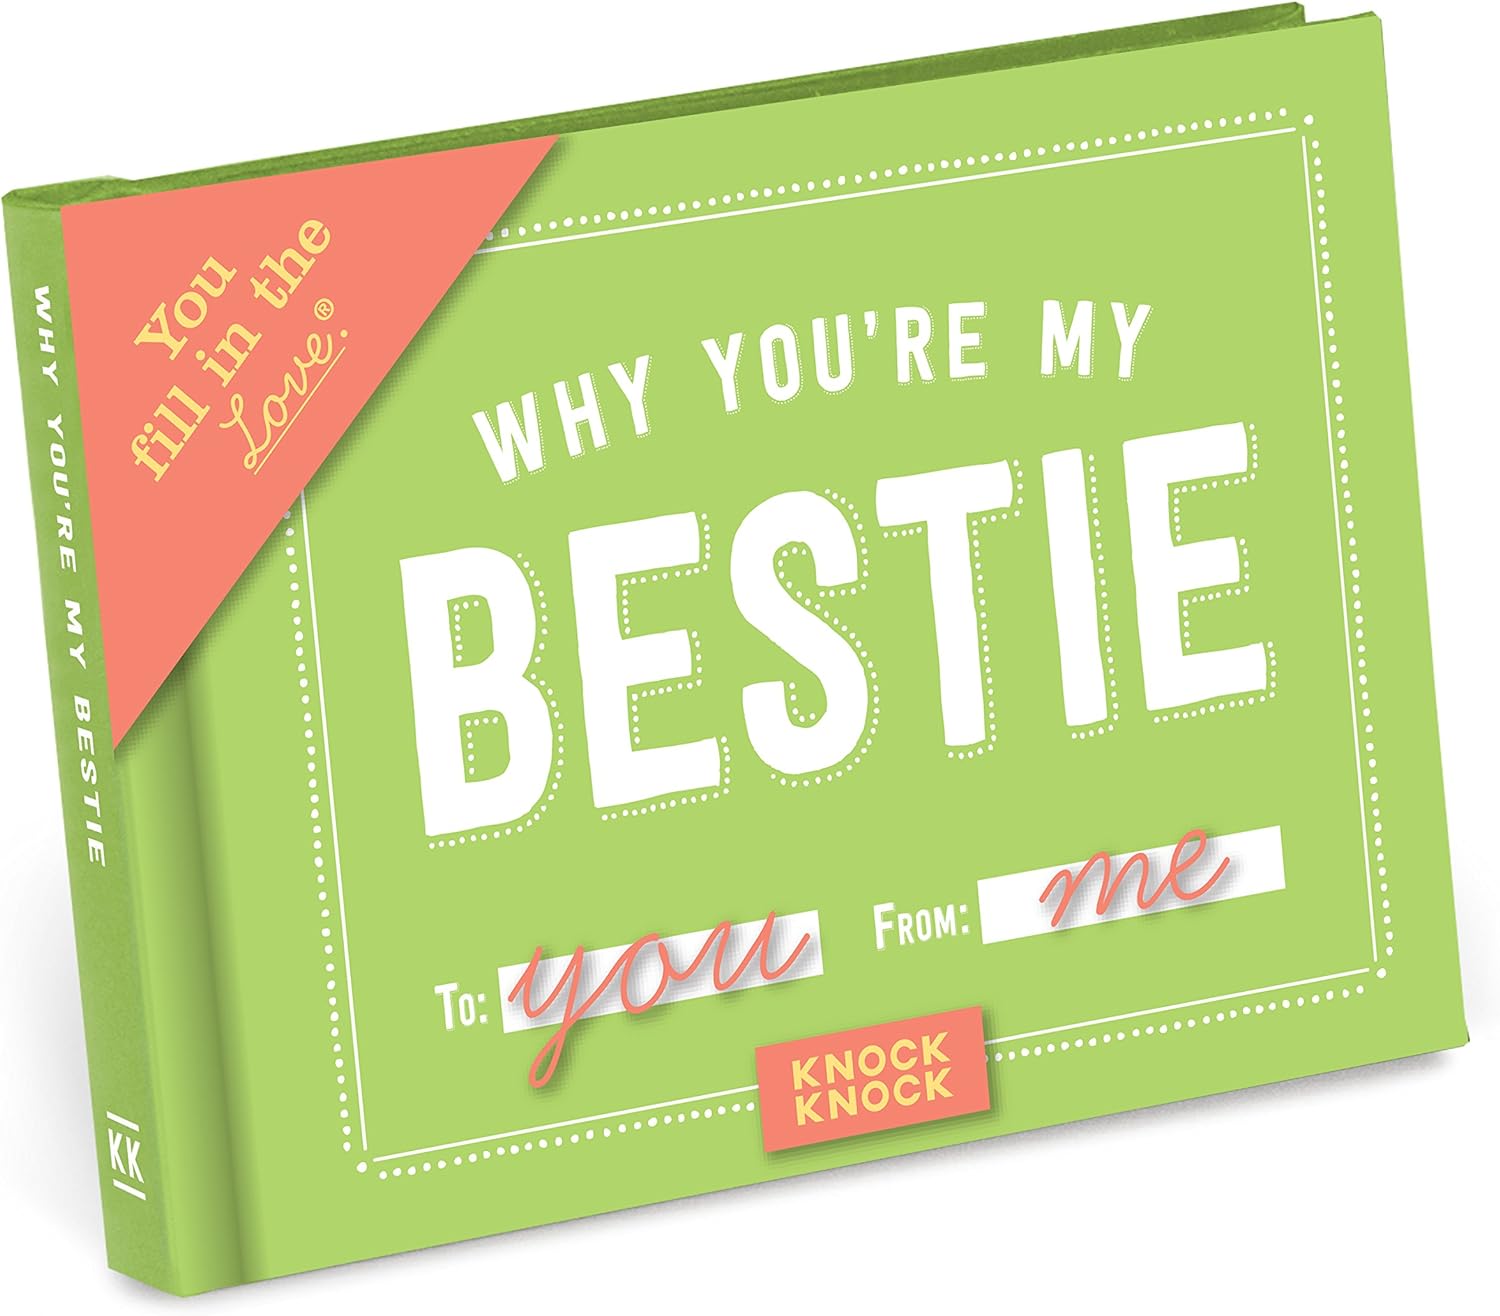 Knock Knock Why You're My Bestie Book Fill in the Love Fill-in-the-Blank Book Gift Journal, 4.5 x 3.25-Inches